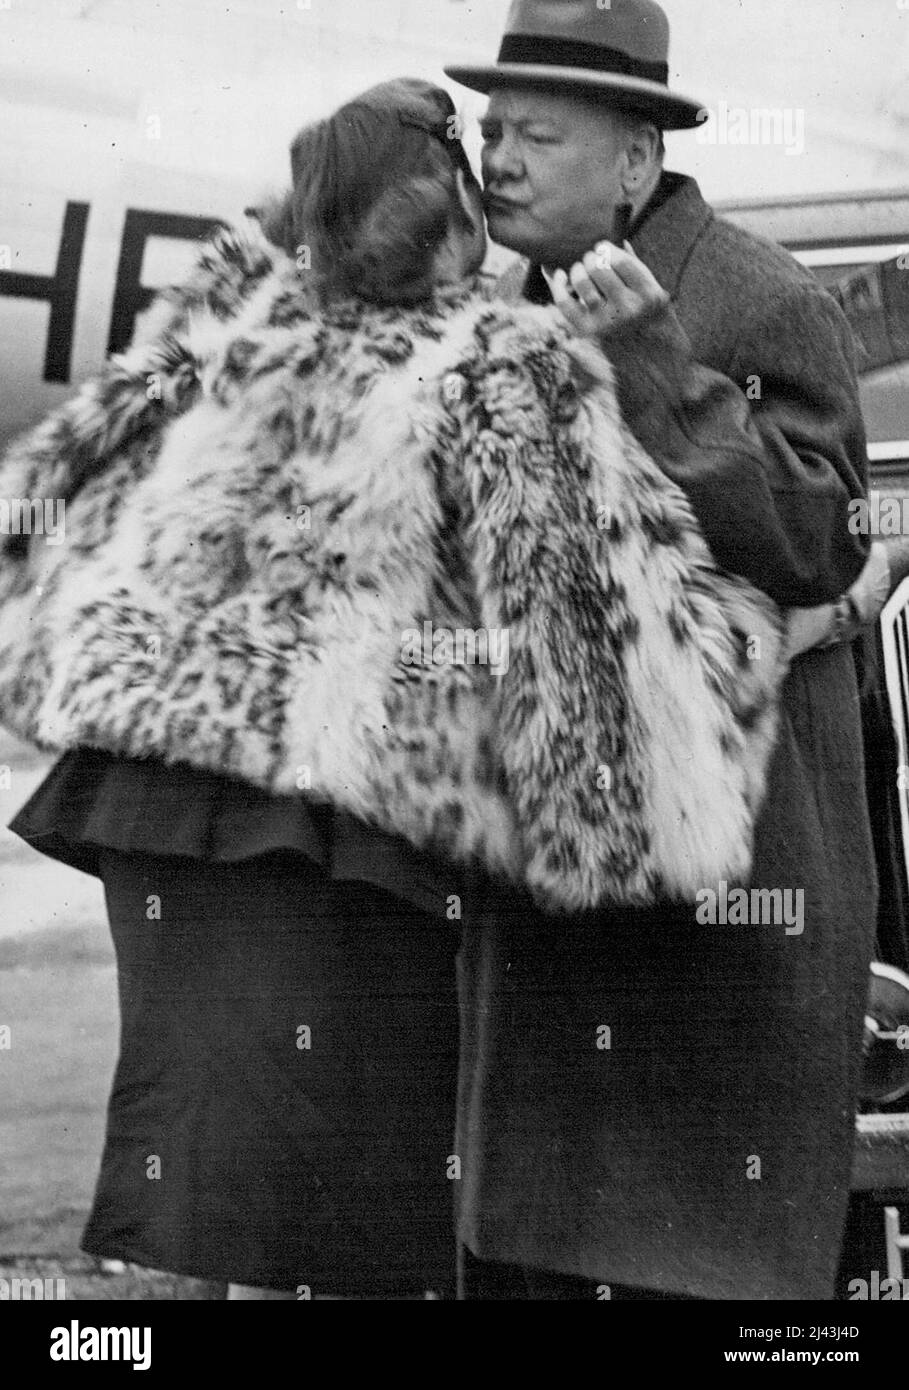 A Feck From Mr. Churchill -- Mr. Churchill Fecks his daughter Mary's cheek in farewell on their arrival at Biggin Hill, as they go different ways. Mr. Winston Churchill and his family arrived back in London to-day from their holiday in Switzerland. He had flown in the bad weather from Zurich to Biggin Hill Airfield. September 20, 1946. Stock Photo